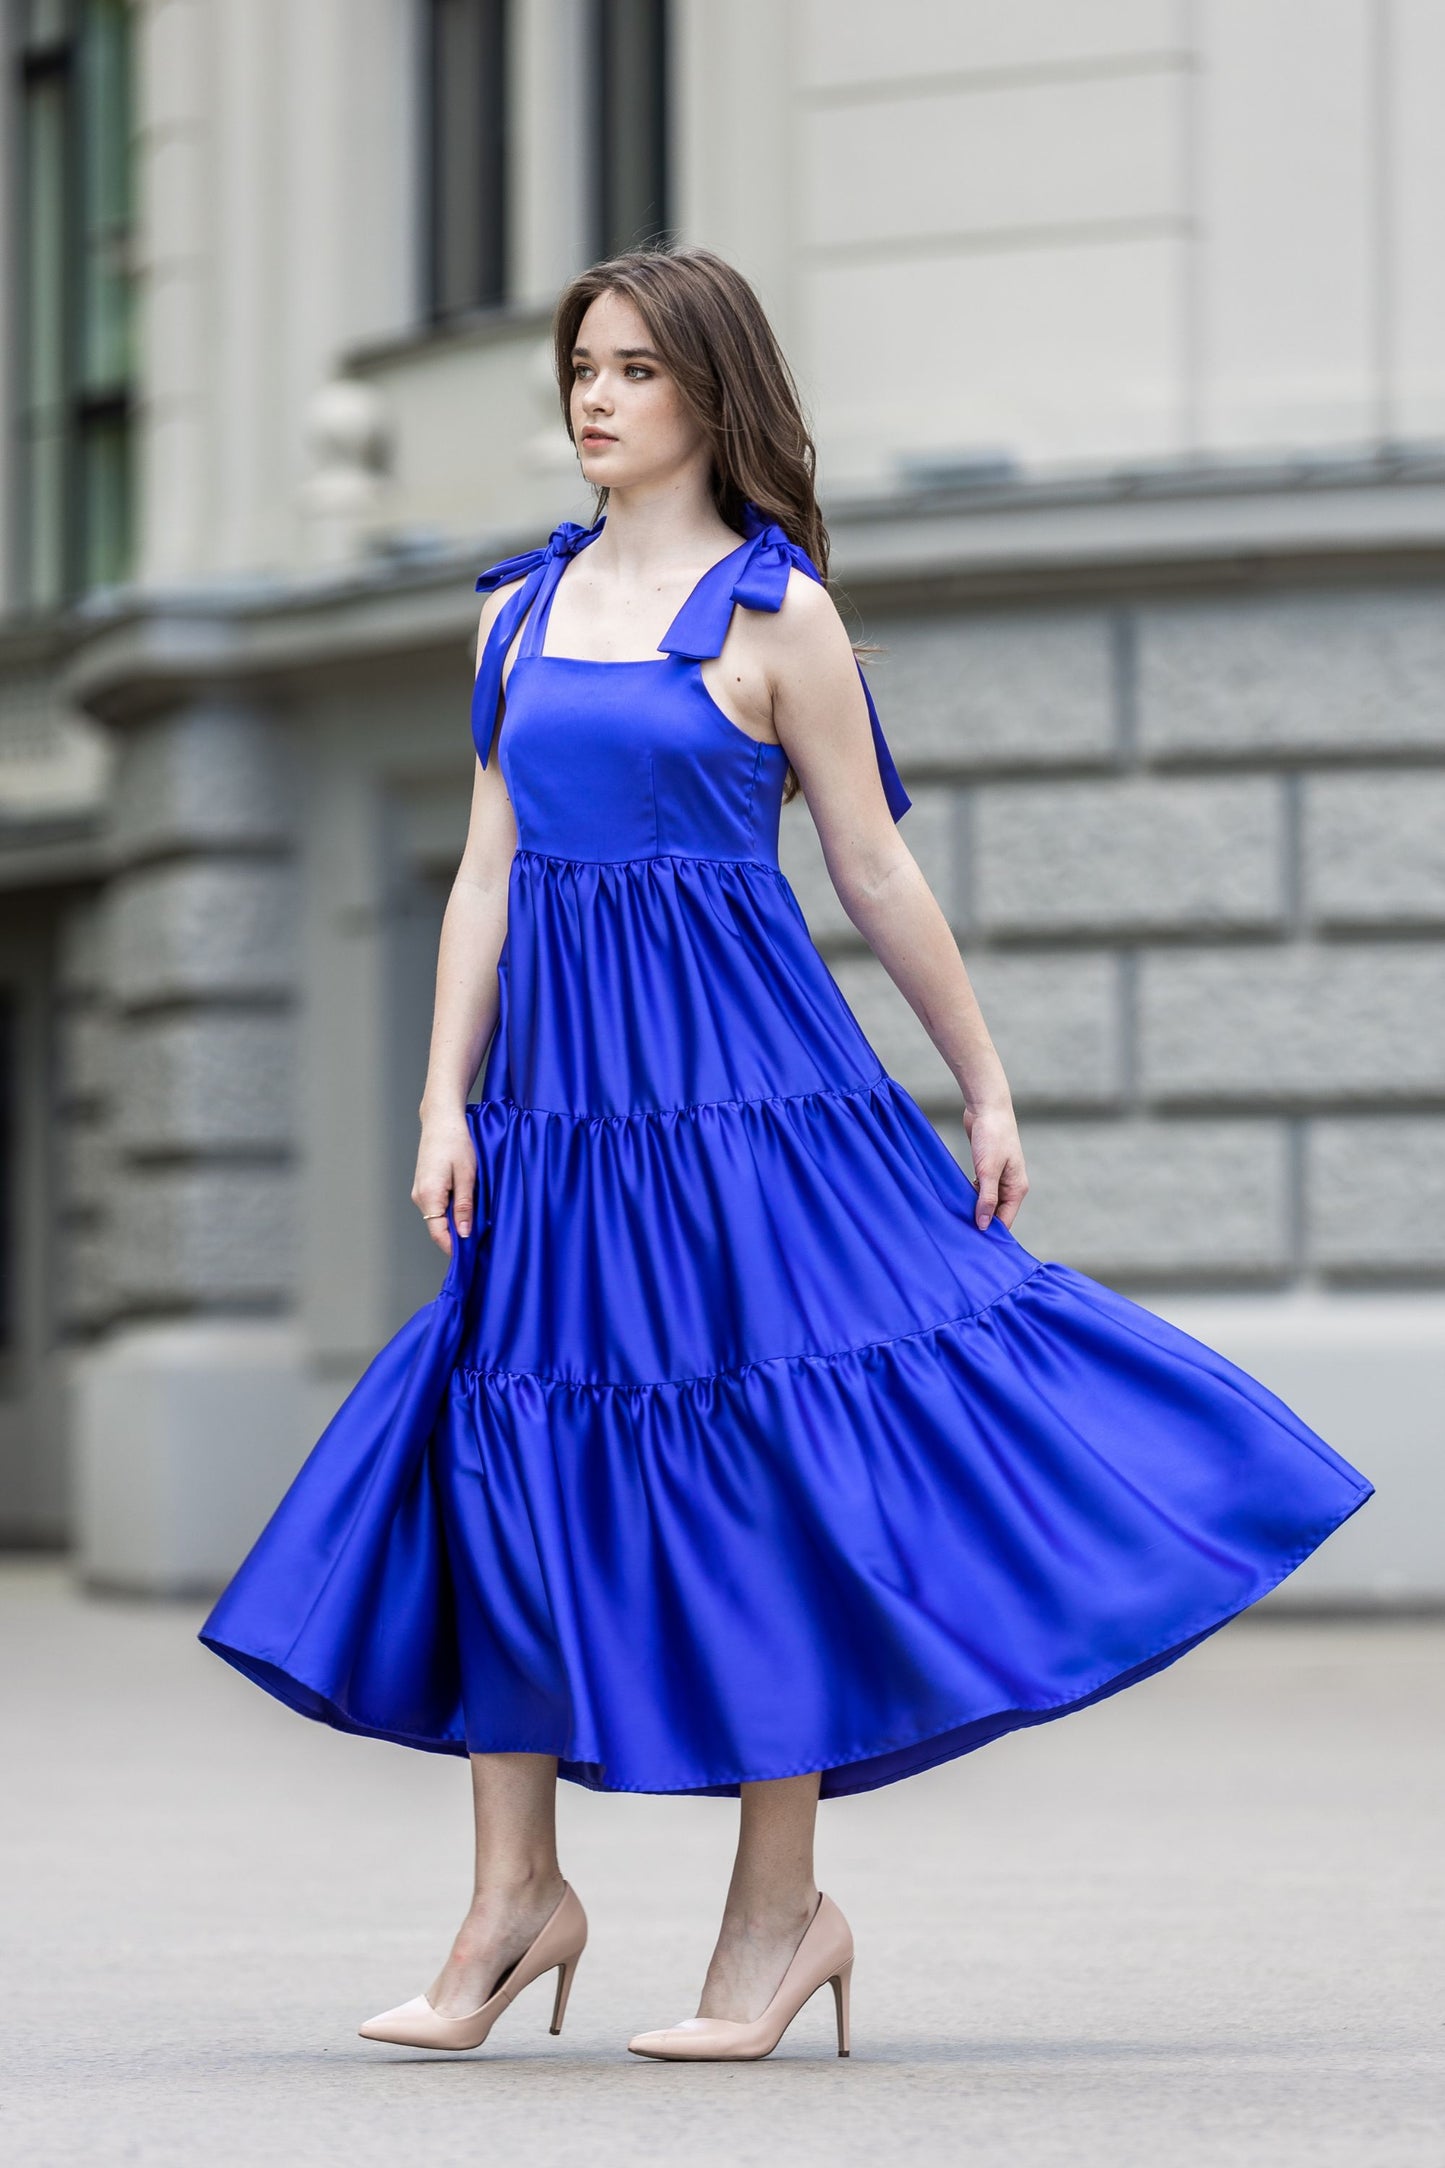 Satin dress with bows on the shoulders.